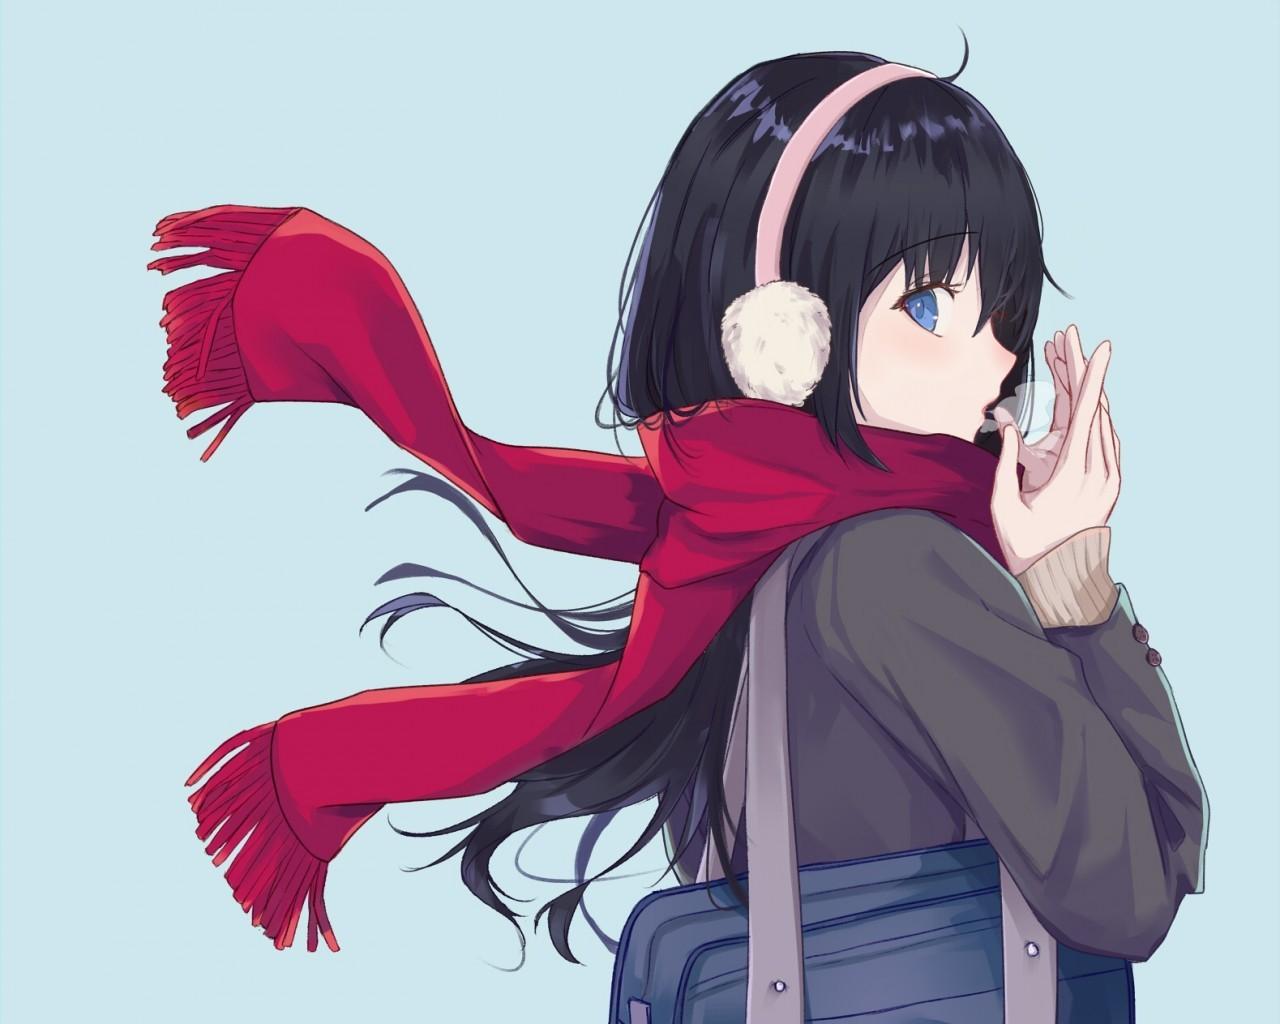 Download 1280x1024 Red Scarf, Black Hair, Anime Girl, Profile View